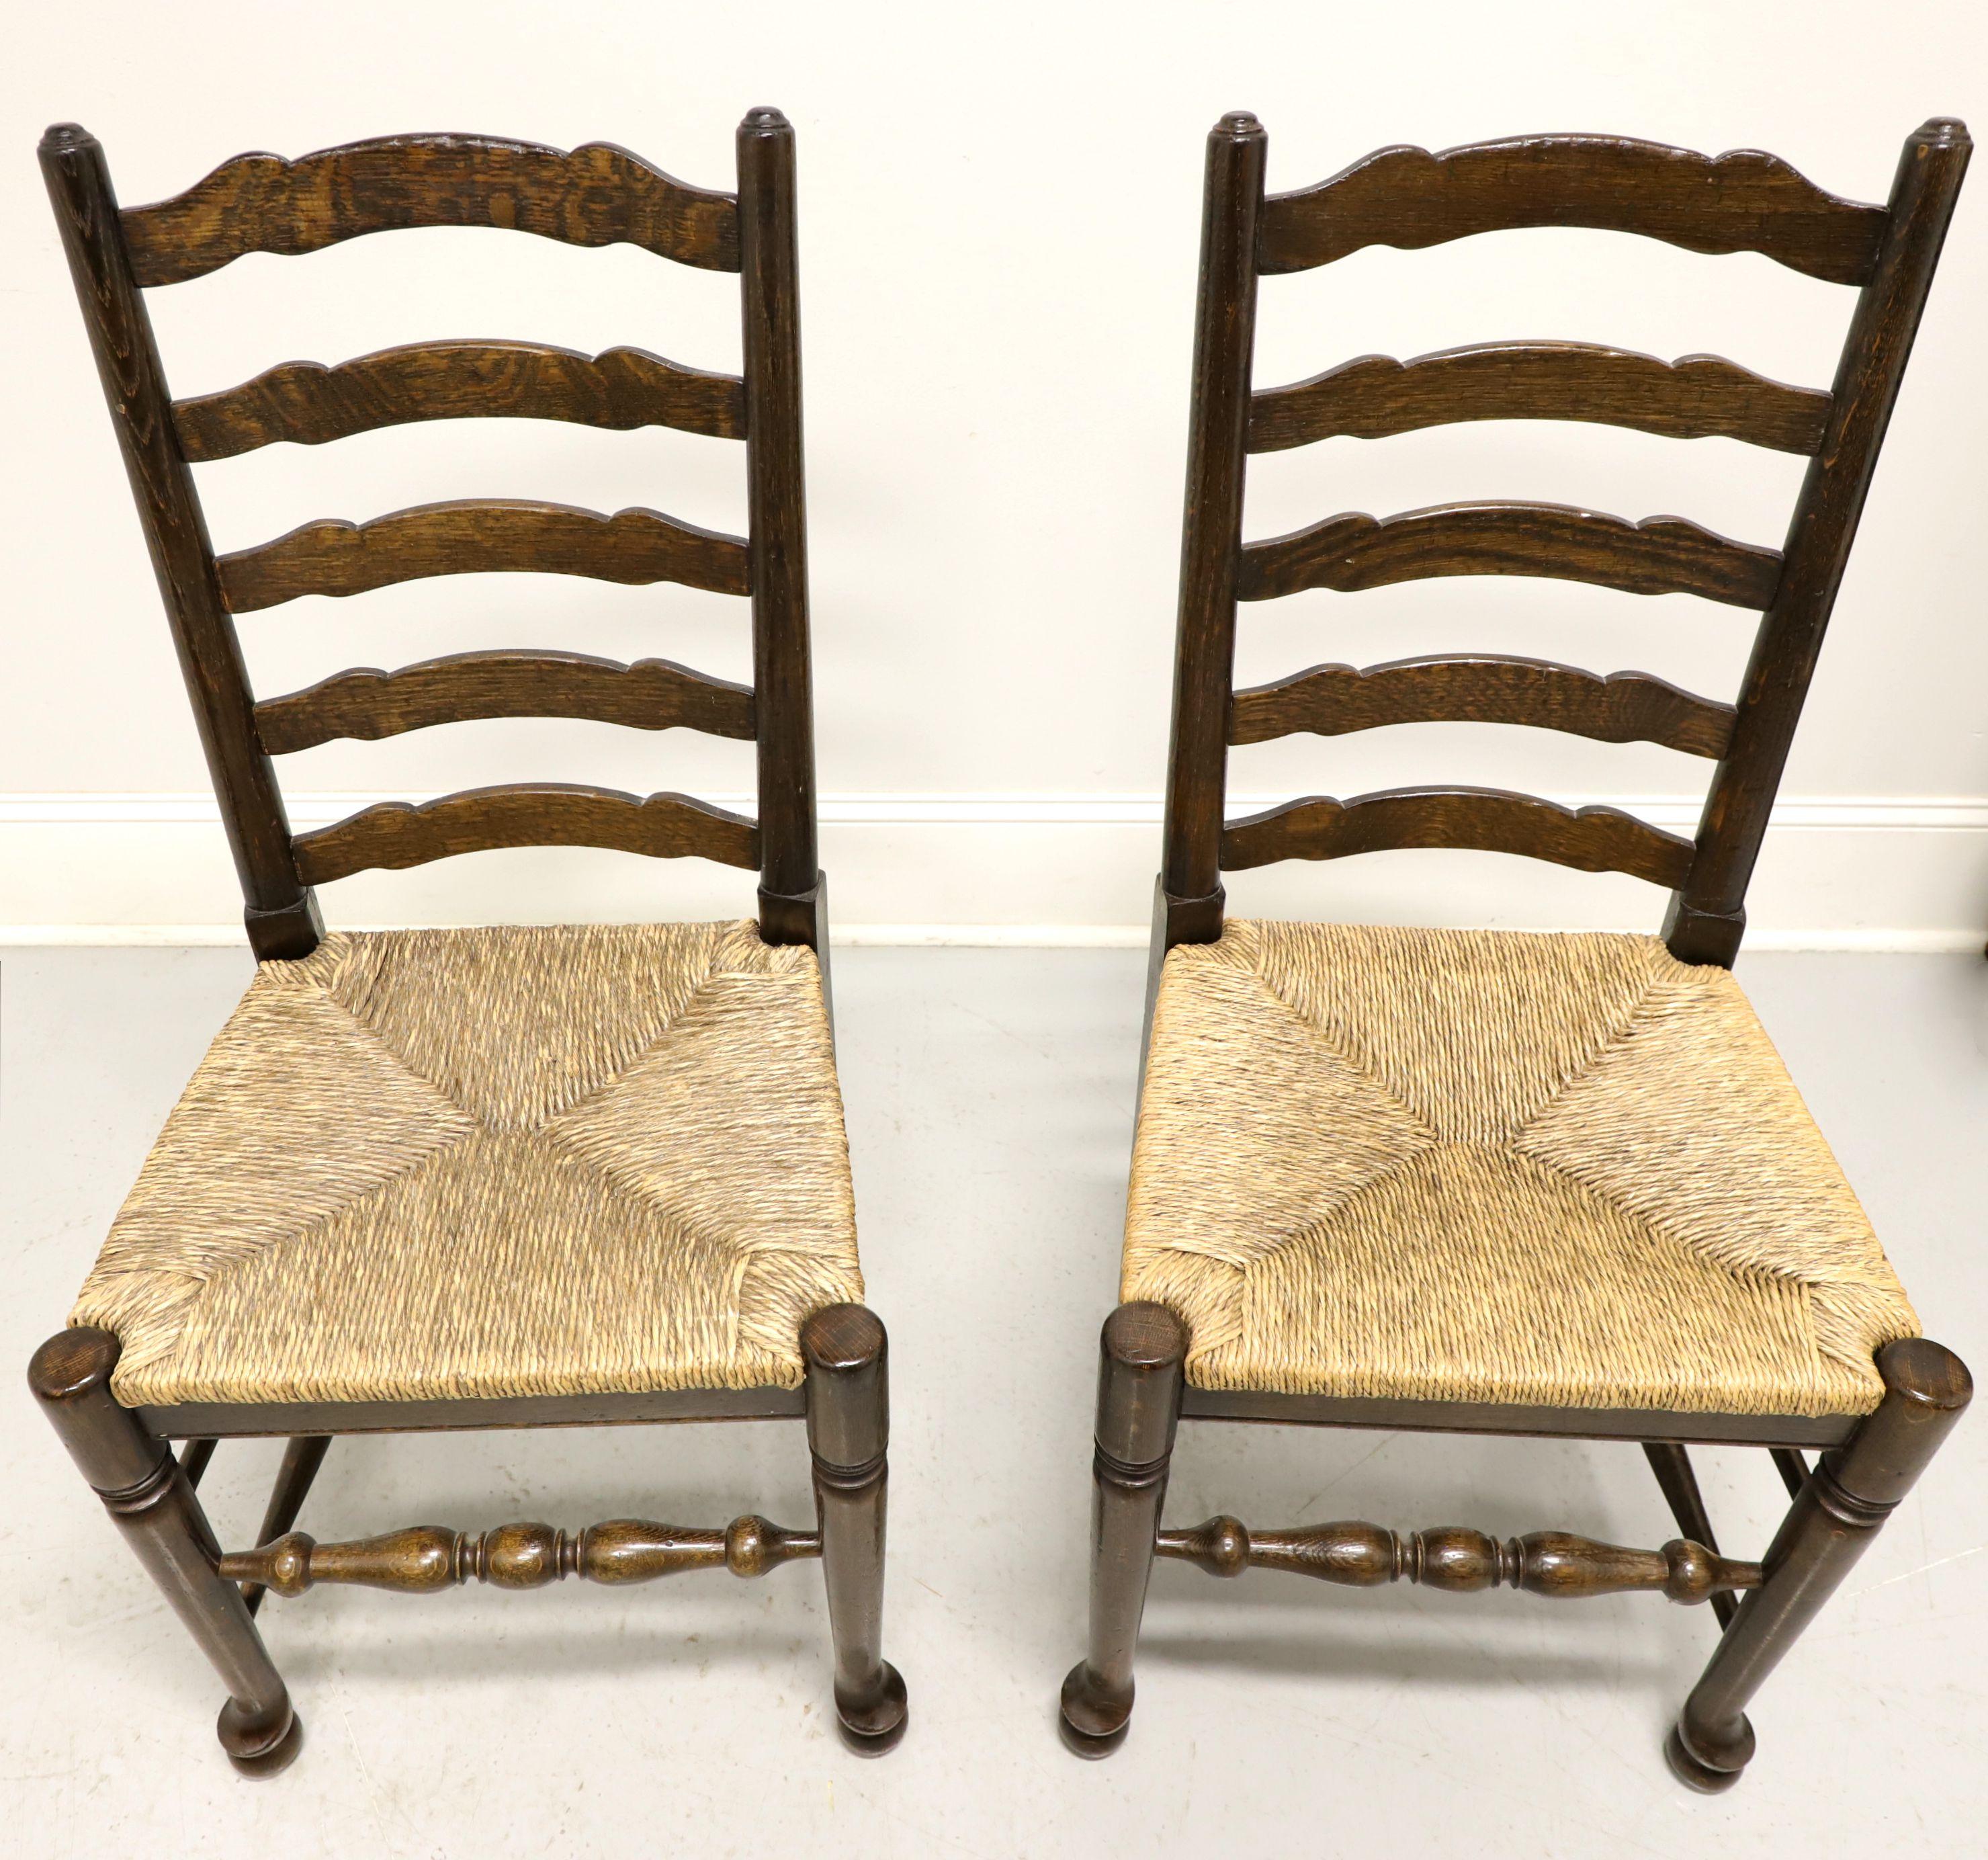 A pair of Cottage style dining side chairs, unbranded, similar in quality to Ethan Allen. Walnut with carved ladder back design, rush seats, turned legs and stretchers. Made in the USA, in the mid 20th Century.

Measures: Overall: 19w 18d 39.5h,